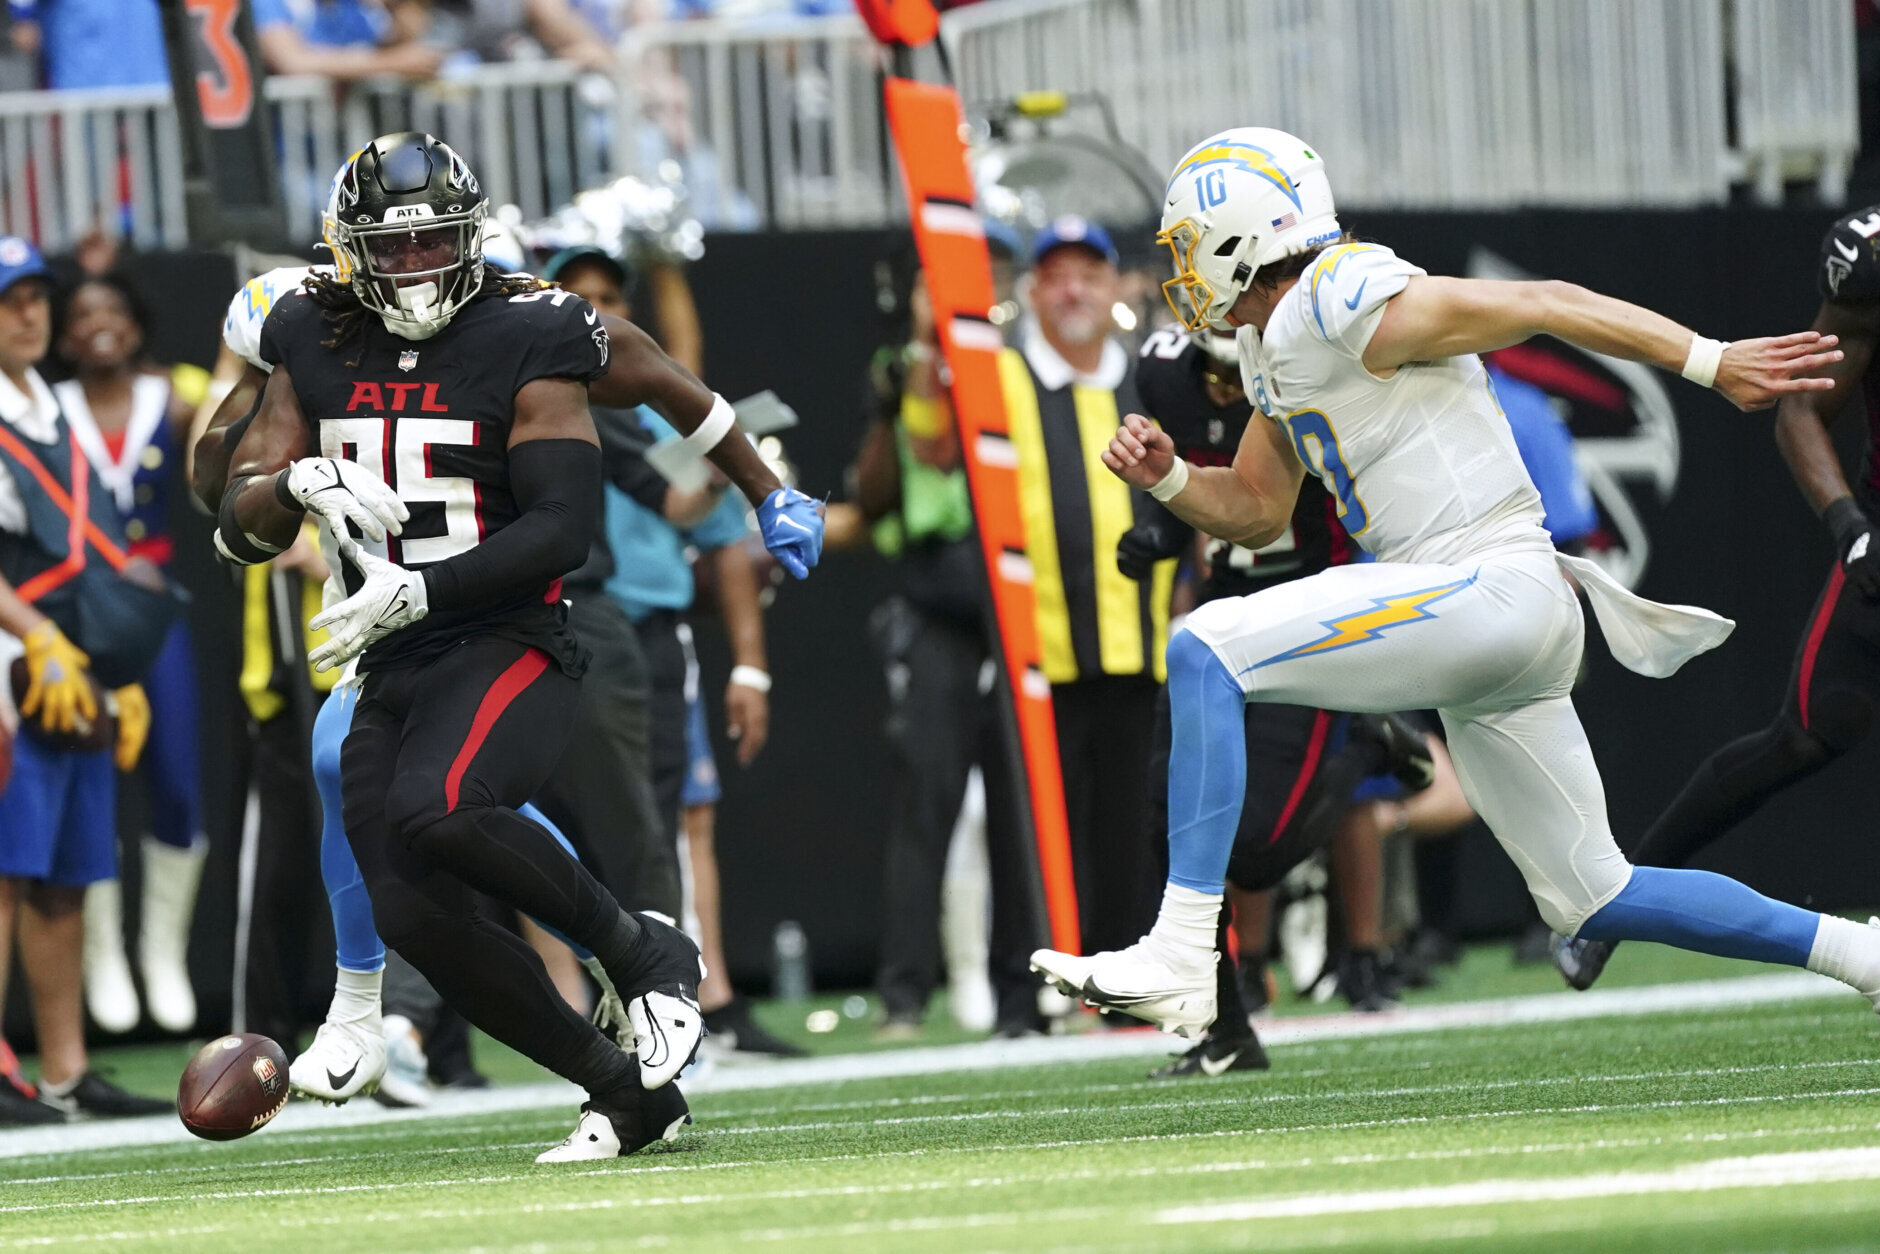 <p><em><strong>Chargers 20</strong></em><br />
<em><strong>Falcons 17</strong></em></p>
<p>Someone alert Dave Preston! A West Coast team won a 1 p.m. EST kickoff! Daylight Saving Time wins again! (Or a game-changing big man fumble cost Atlanta, either way.)</p>
